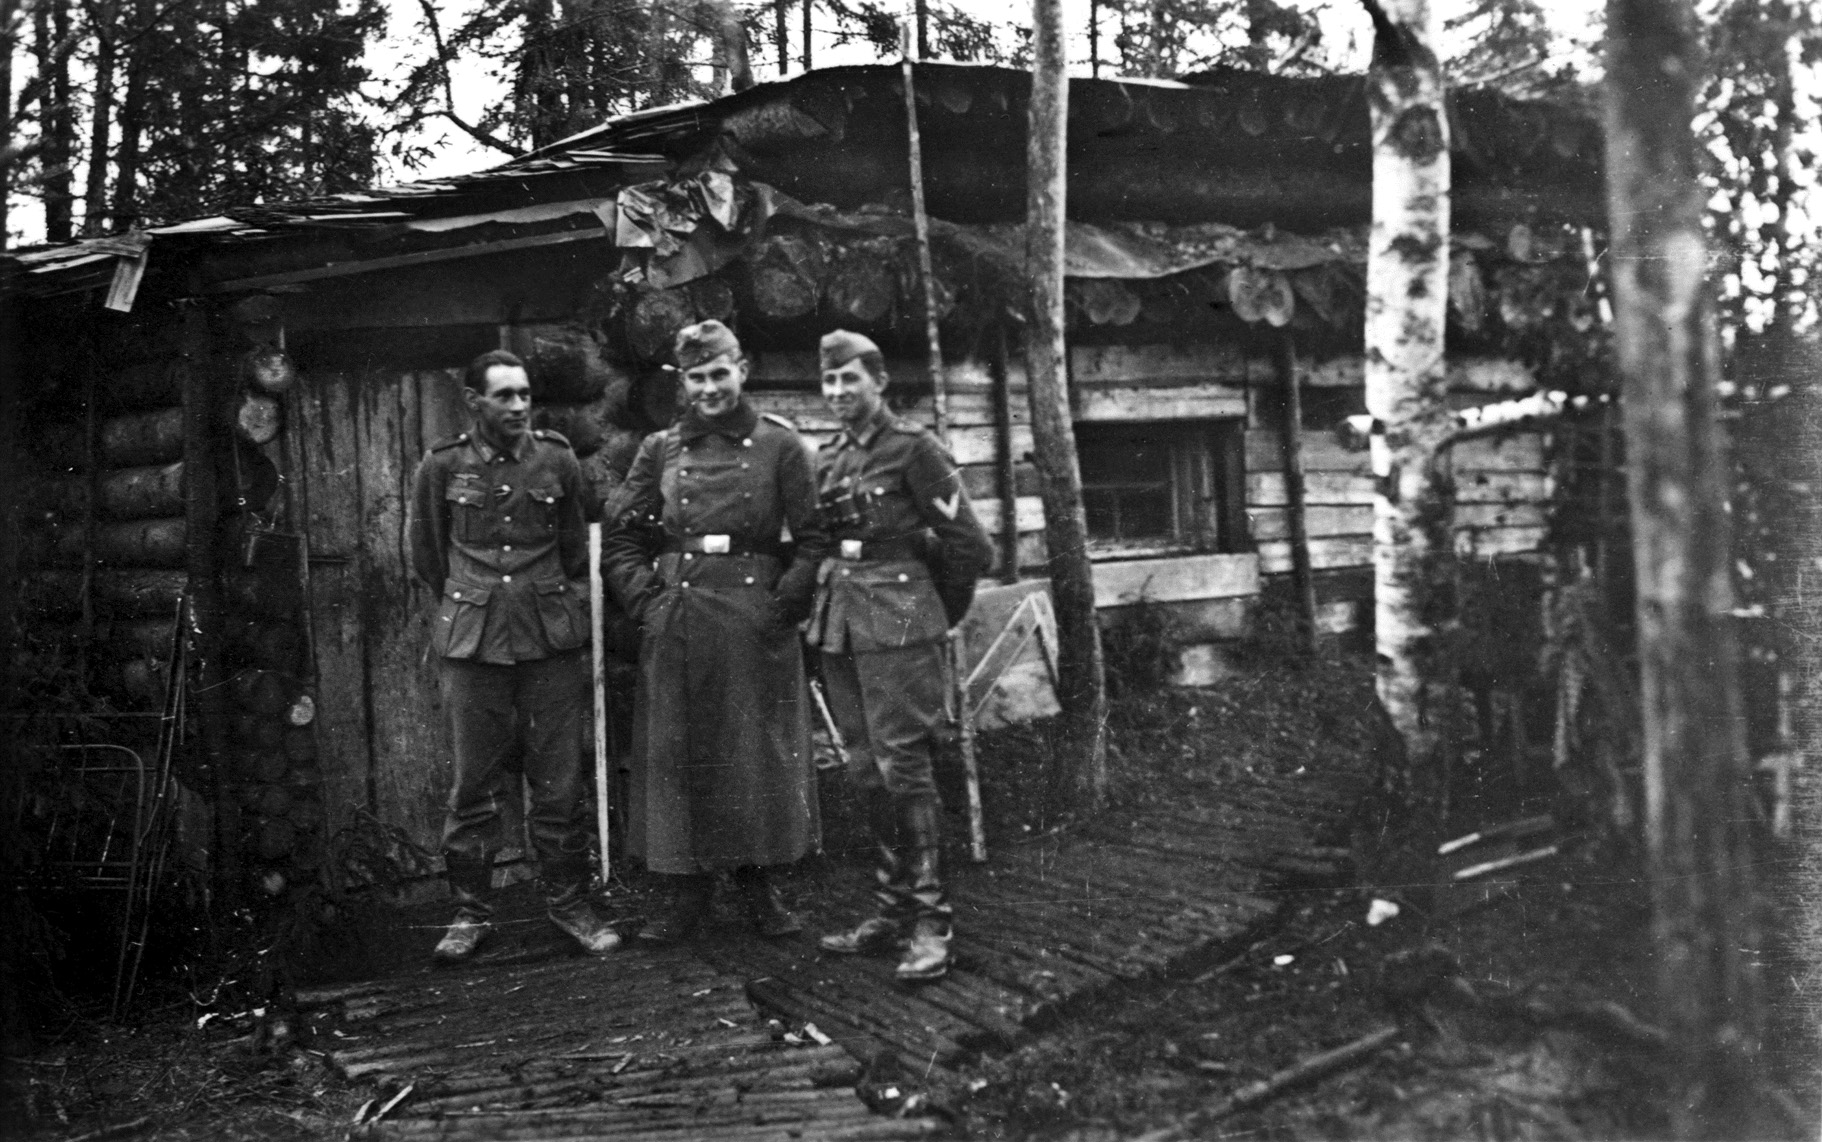 The author poses between two comrades outside a wooden bunker in a forest at Oranienbaum, located on the Gulf of Finland west of St. Petersburg (then Leningrad) in the summer of 1942.